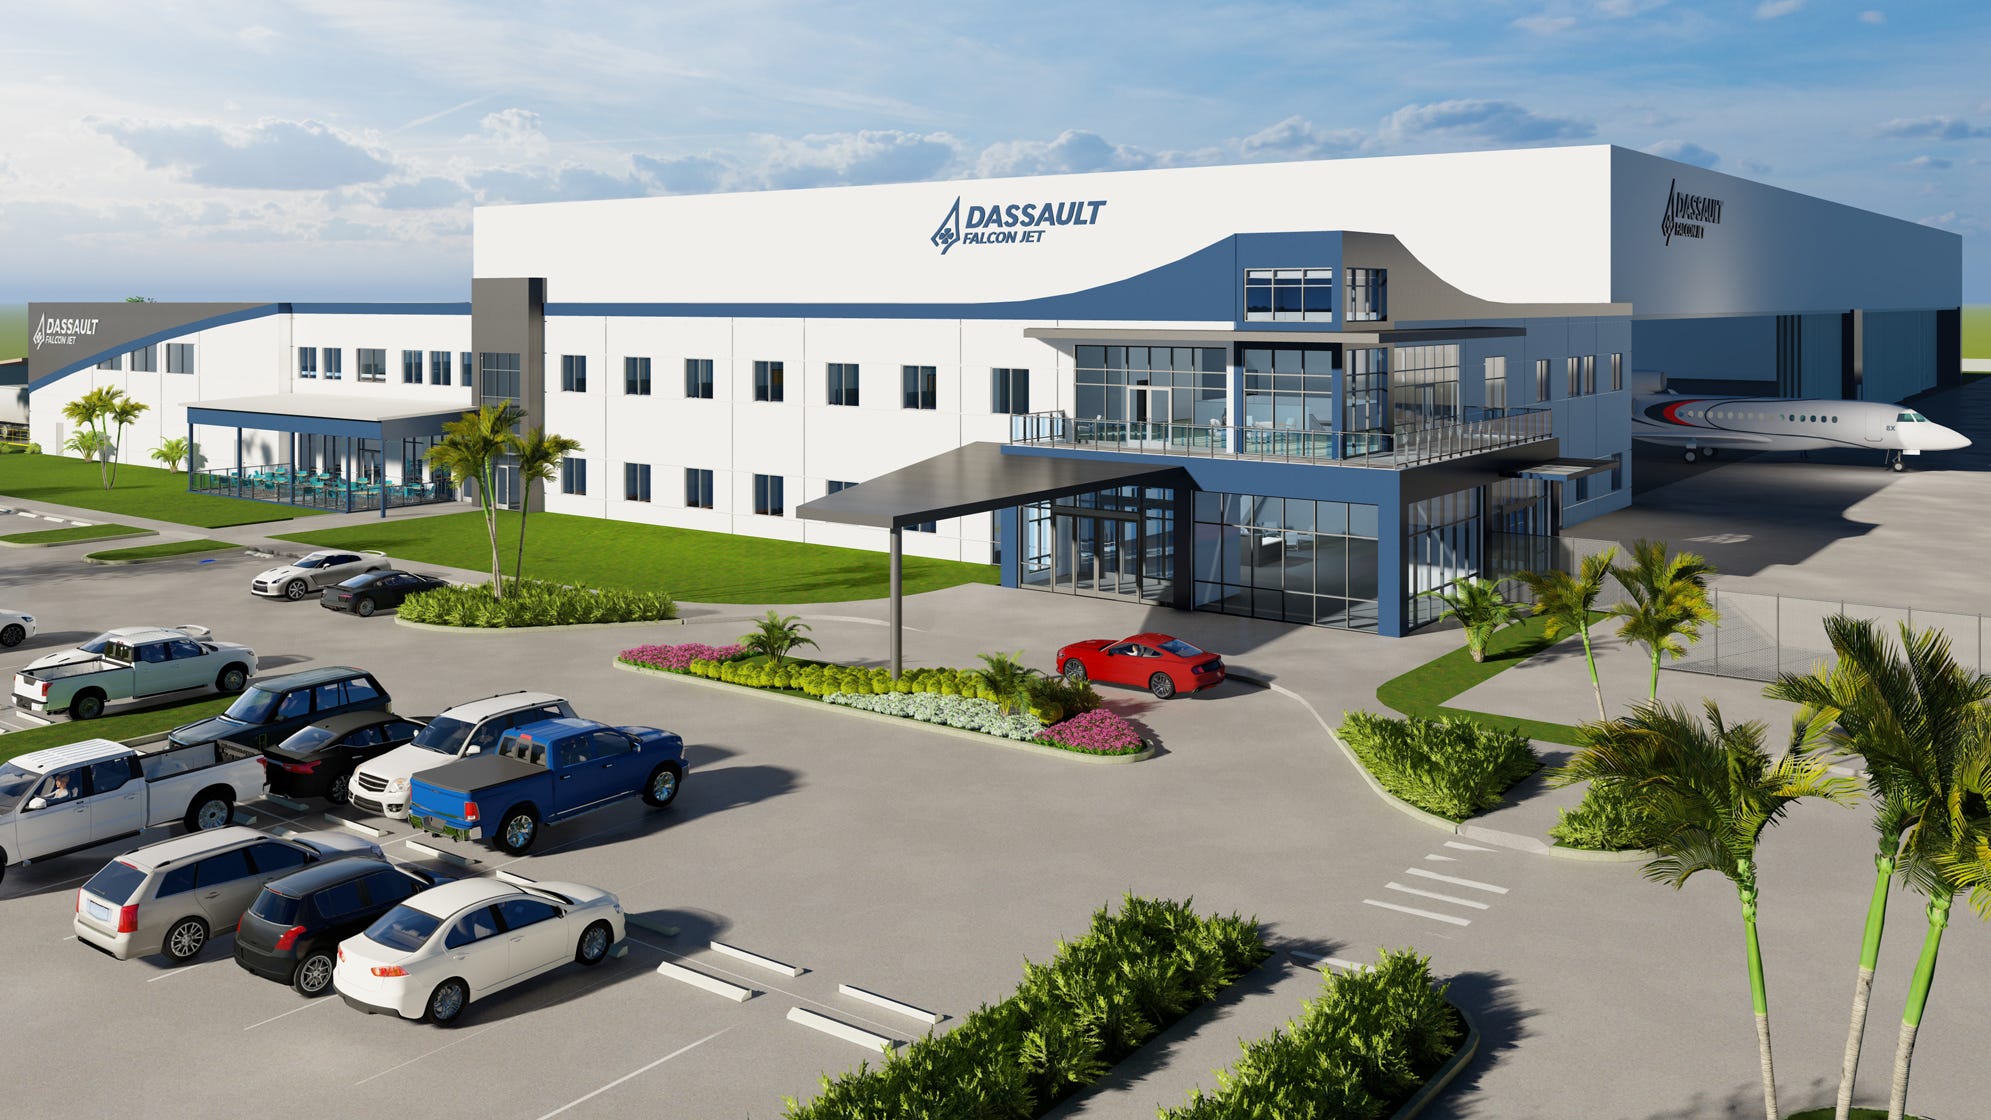 Dassault Falcon Jet announces plan to create 400 new jobs at Melbourne airport facility